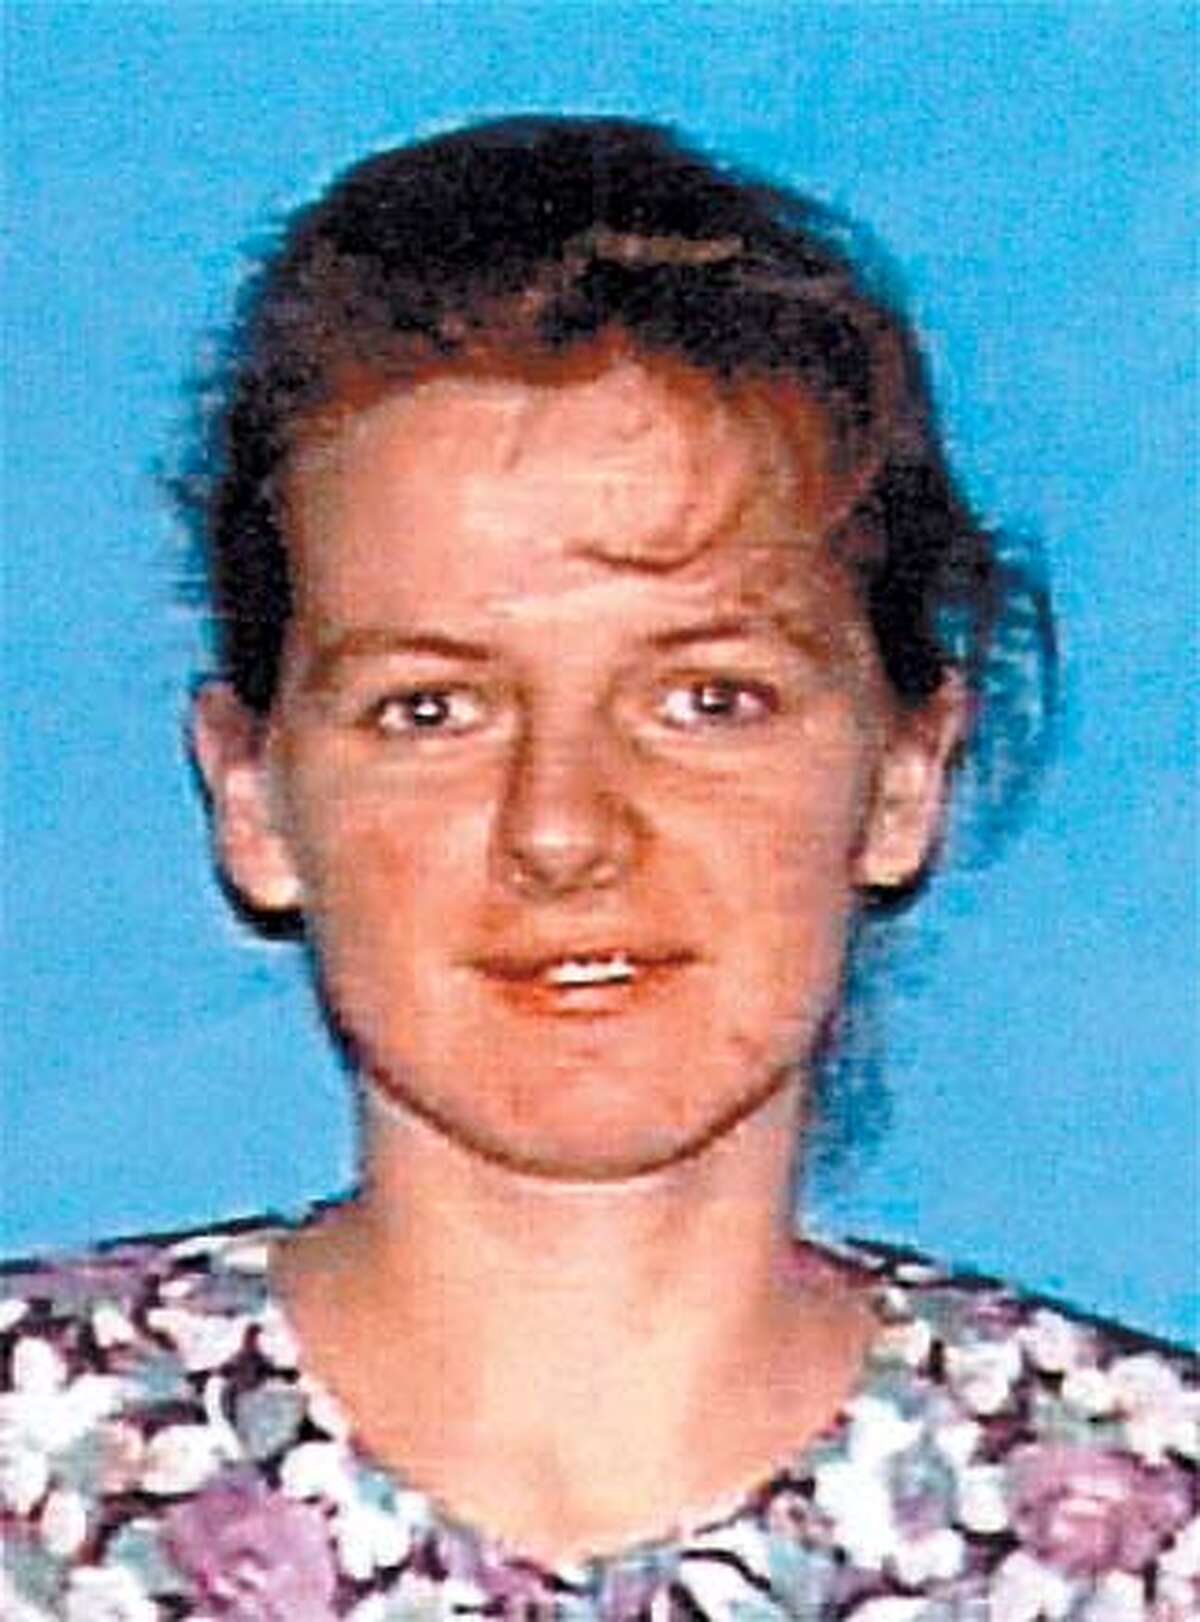 FILE--Lyubov Soltys, the slain wife of Nikolay Soltys, is shown in this undated drivers license photo provided by the California Department of Motor Vehicles. Authorities posted a $10,000 reward Tuesday and pursued dozens of tips in a nationwide manhunt for Nikolay Soltys, the Ukrainian immigrant who allegedly killed his pregnant wife Lyubov, and four other relatives before fleeing with his toddler son. (AP Photo/California Department of Motor Vehicles, File)